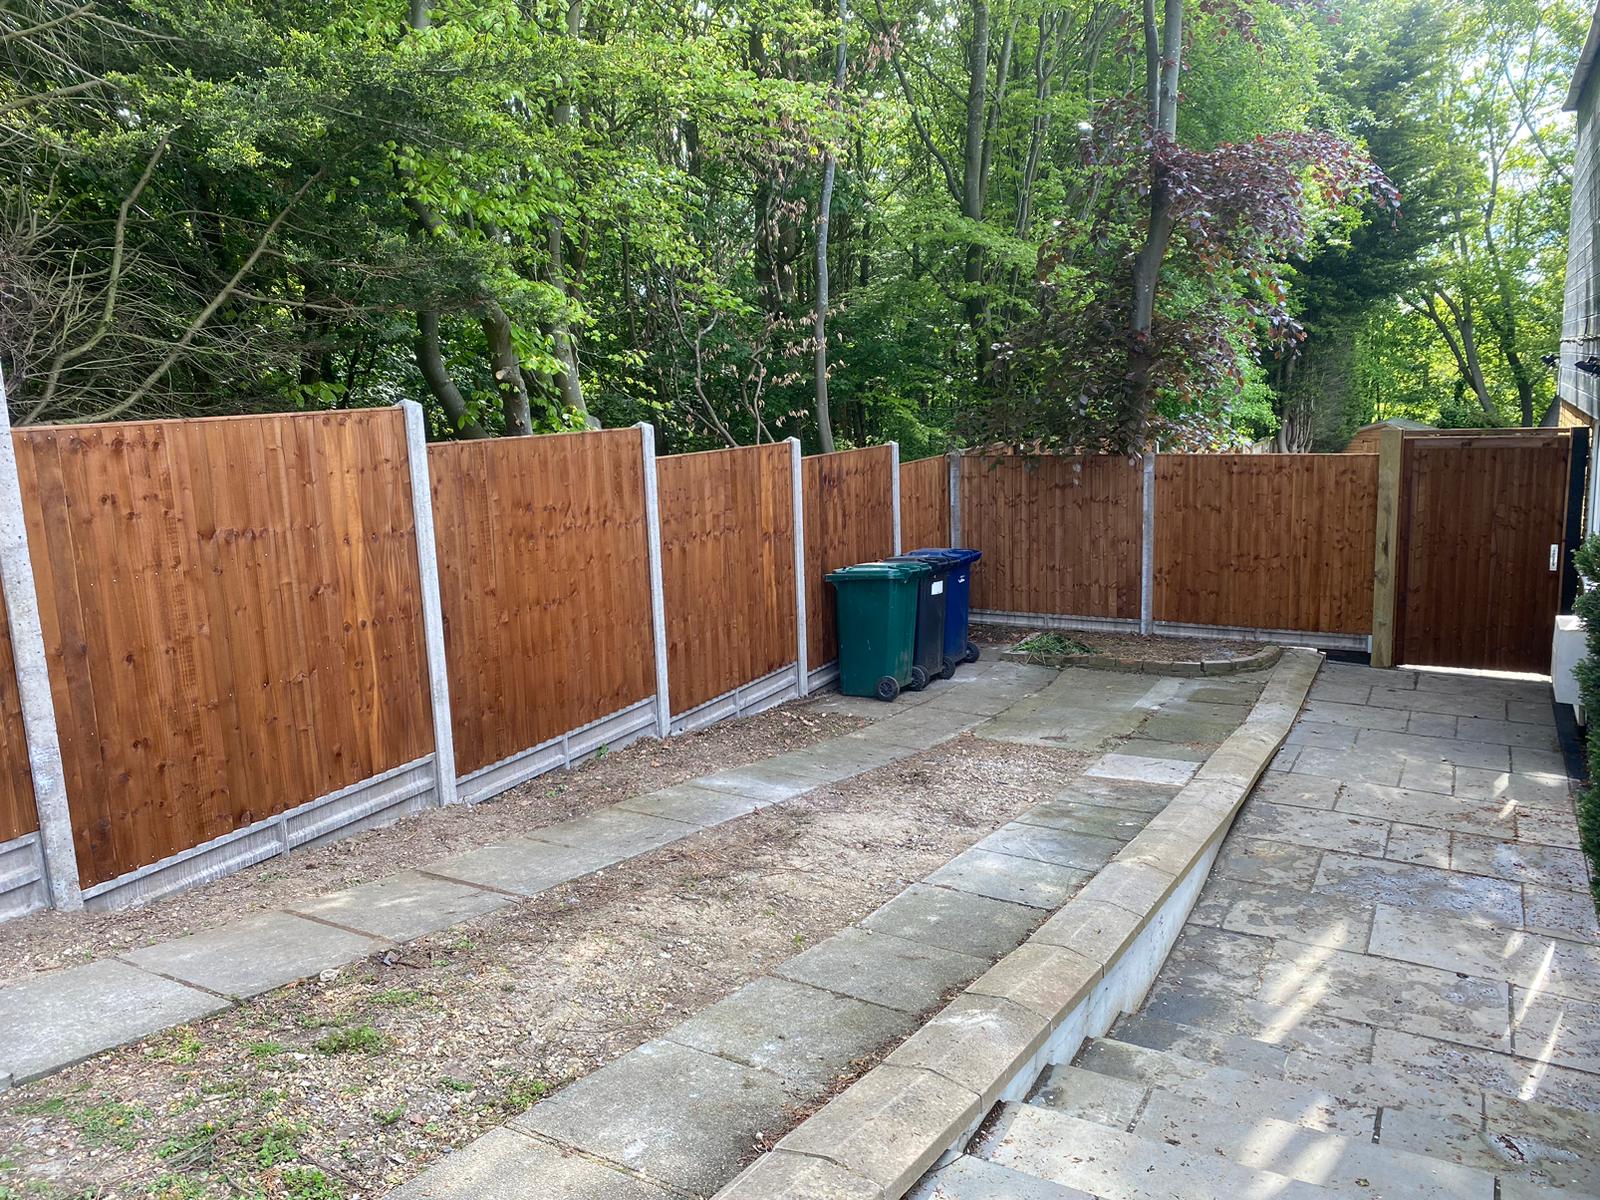 An image showing 6 new fence panels installed to back garden with concrete posts